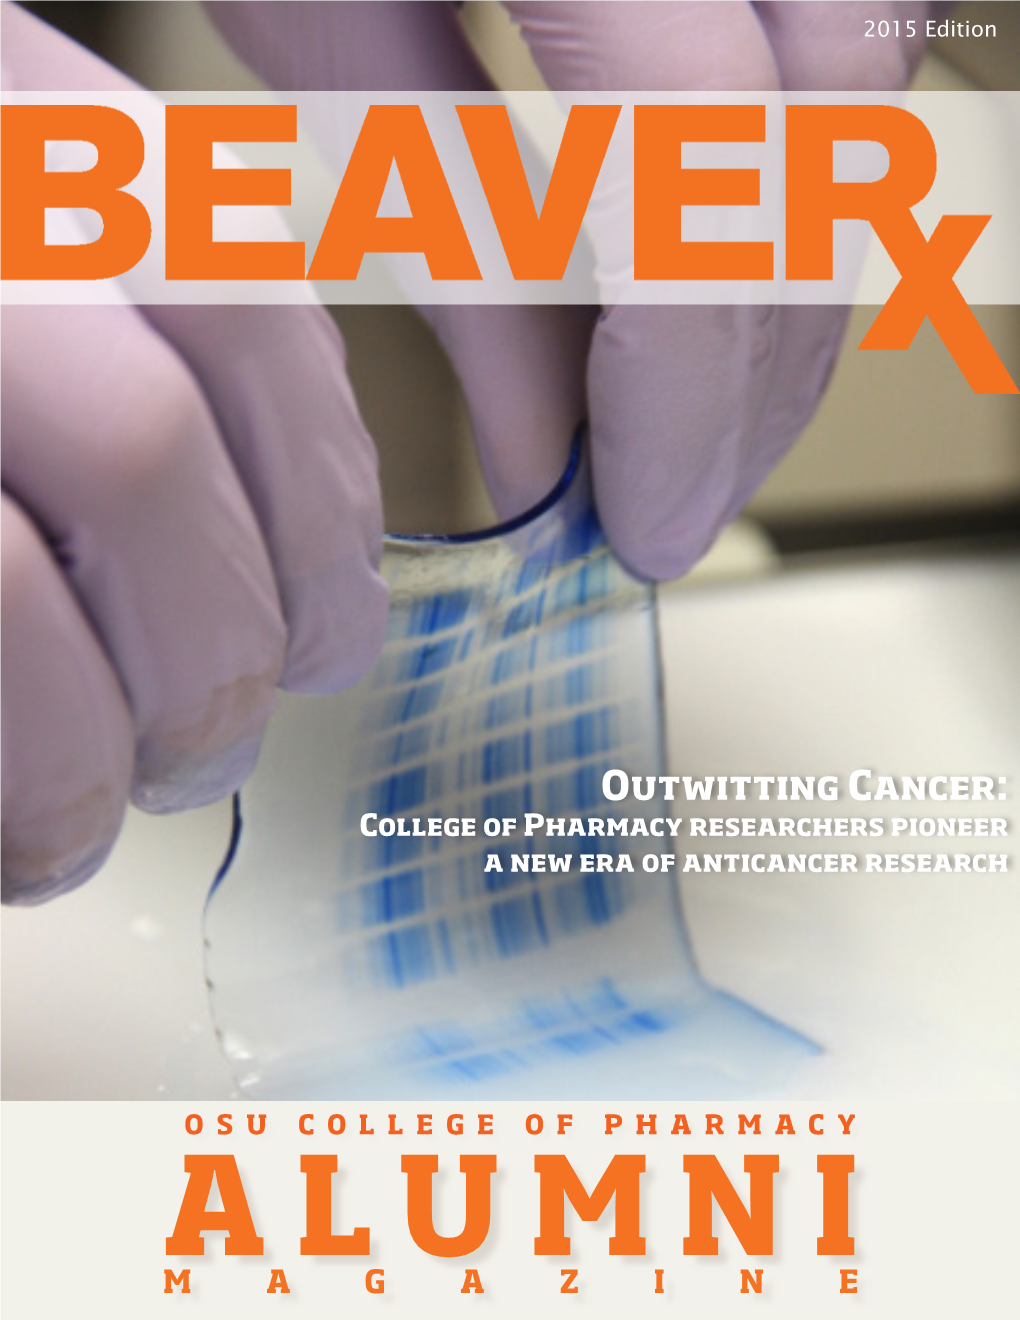 Outwitting Cancer: College of Pharmacy Researchers Pioneer a New Era of Anticancer Research